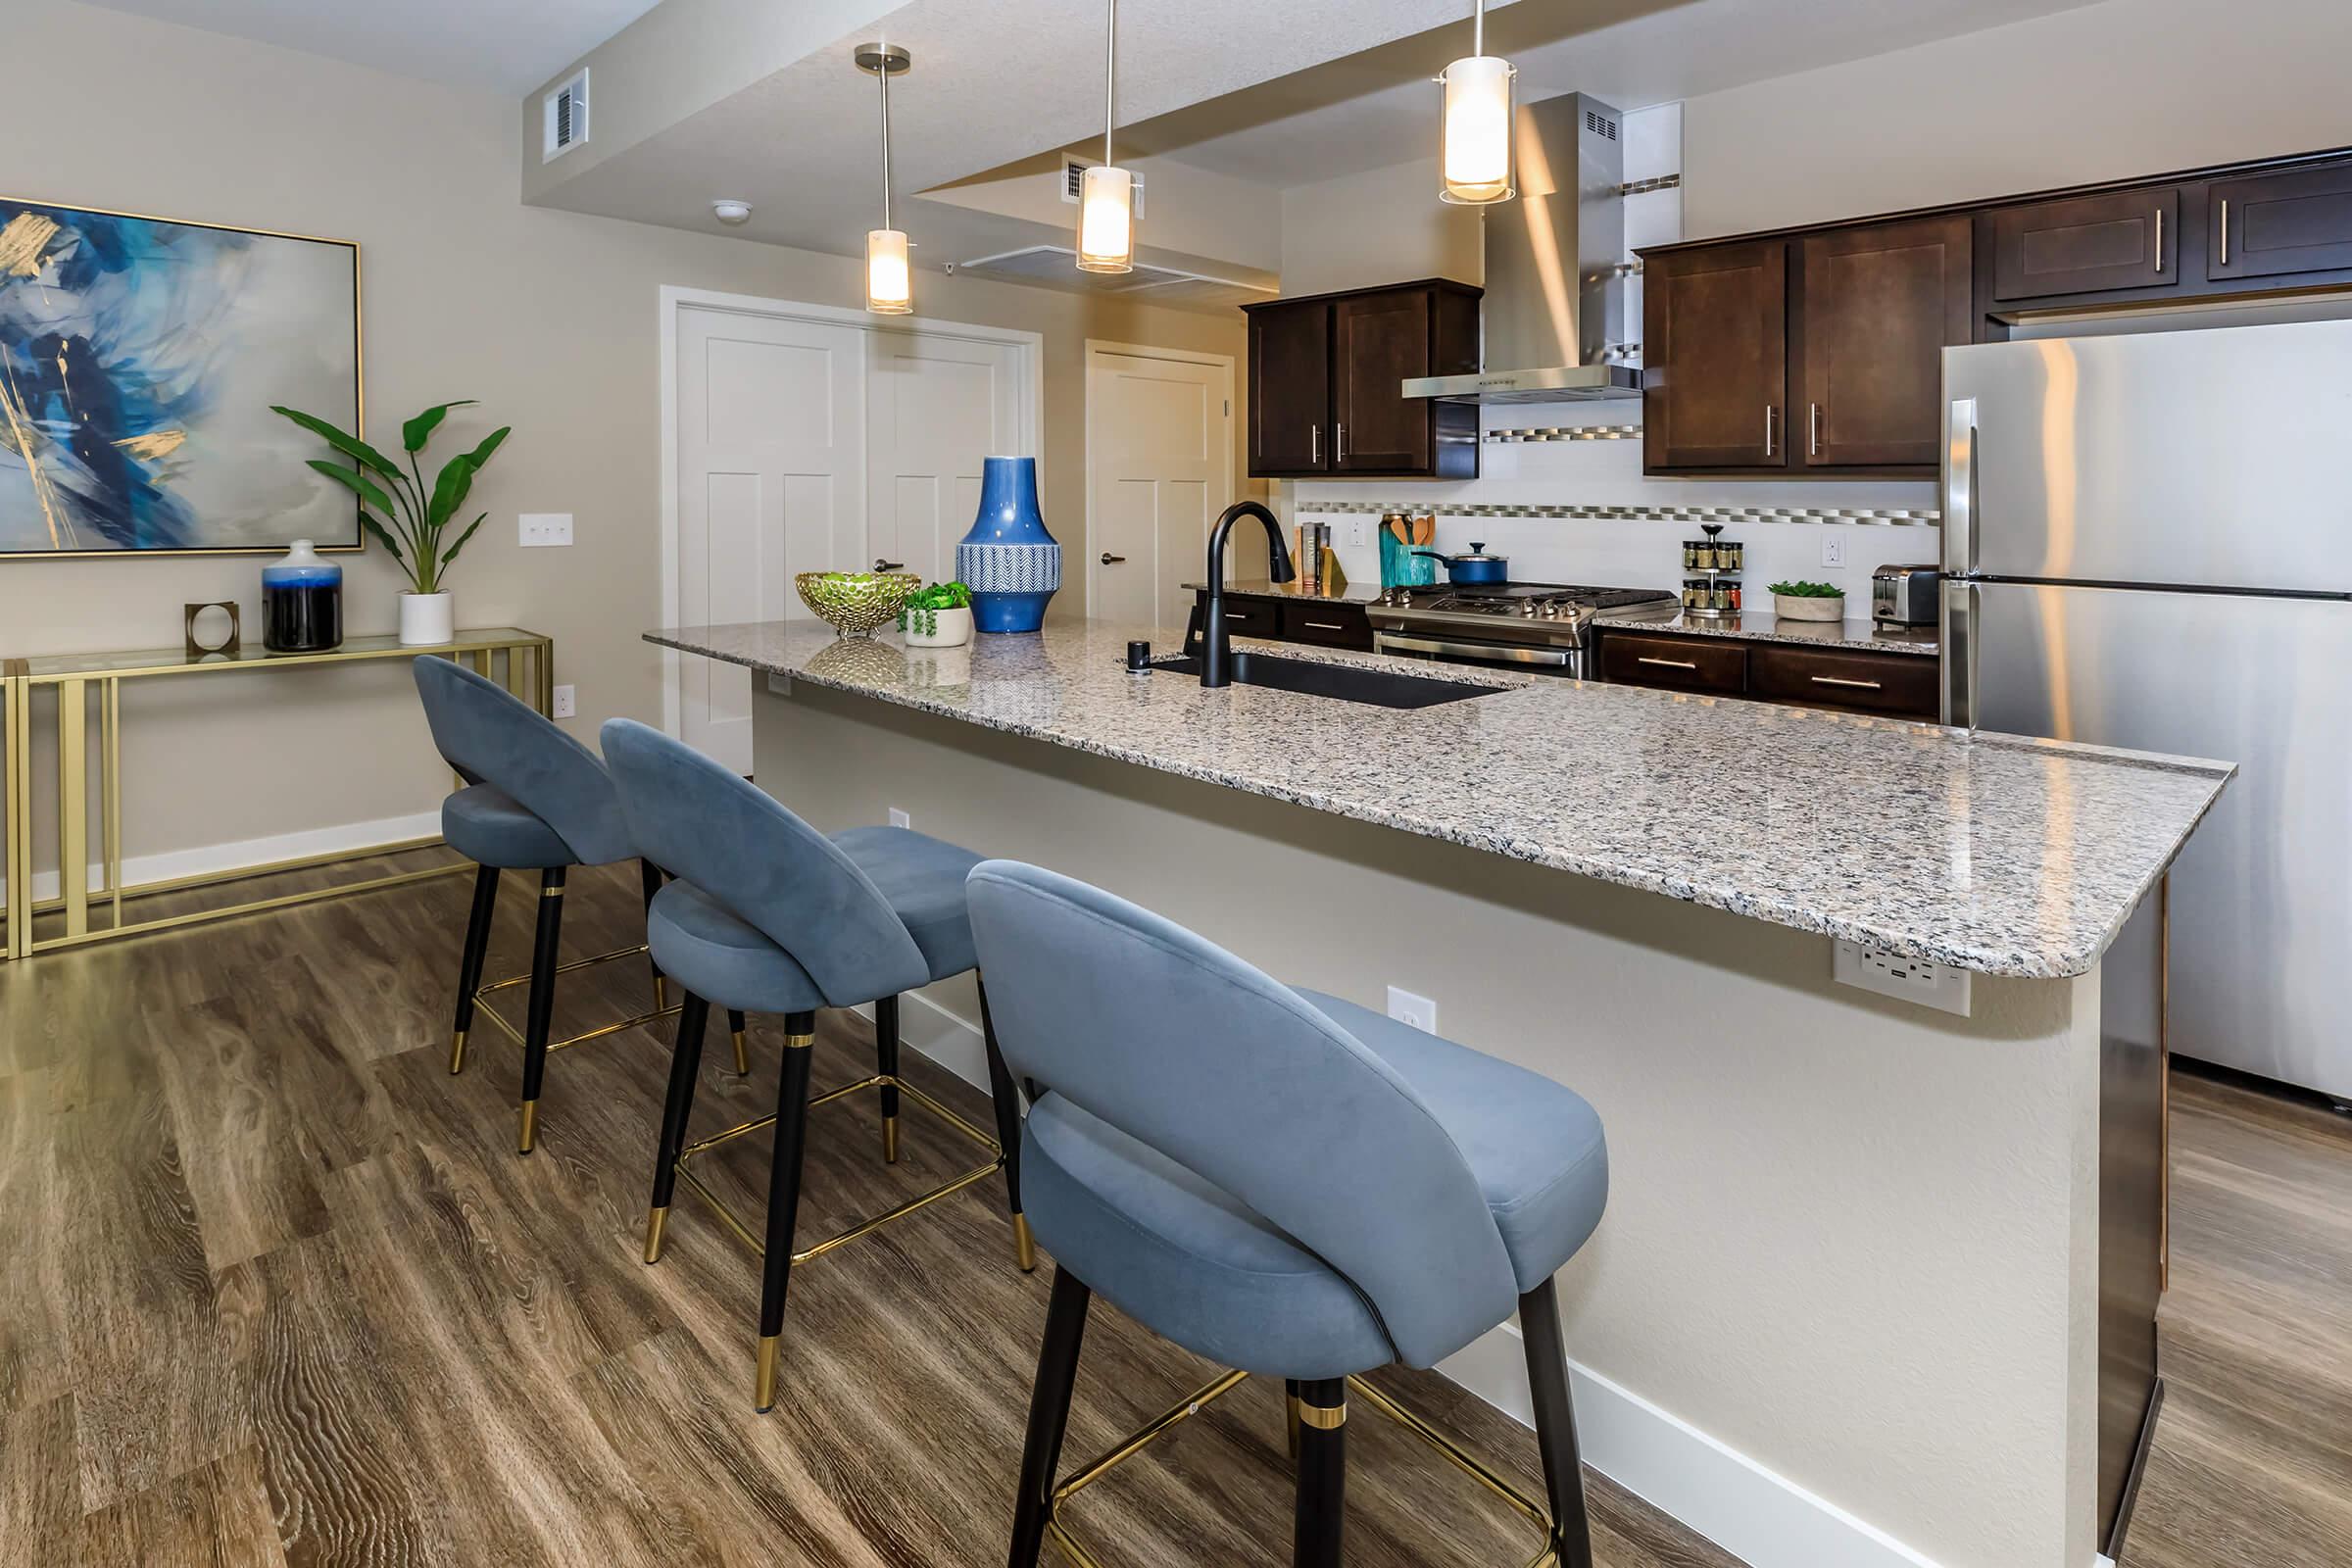 Kitchen counter with blue chairs